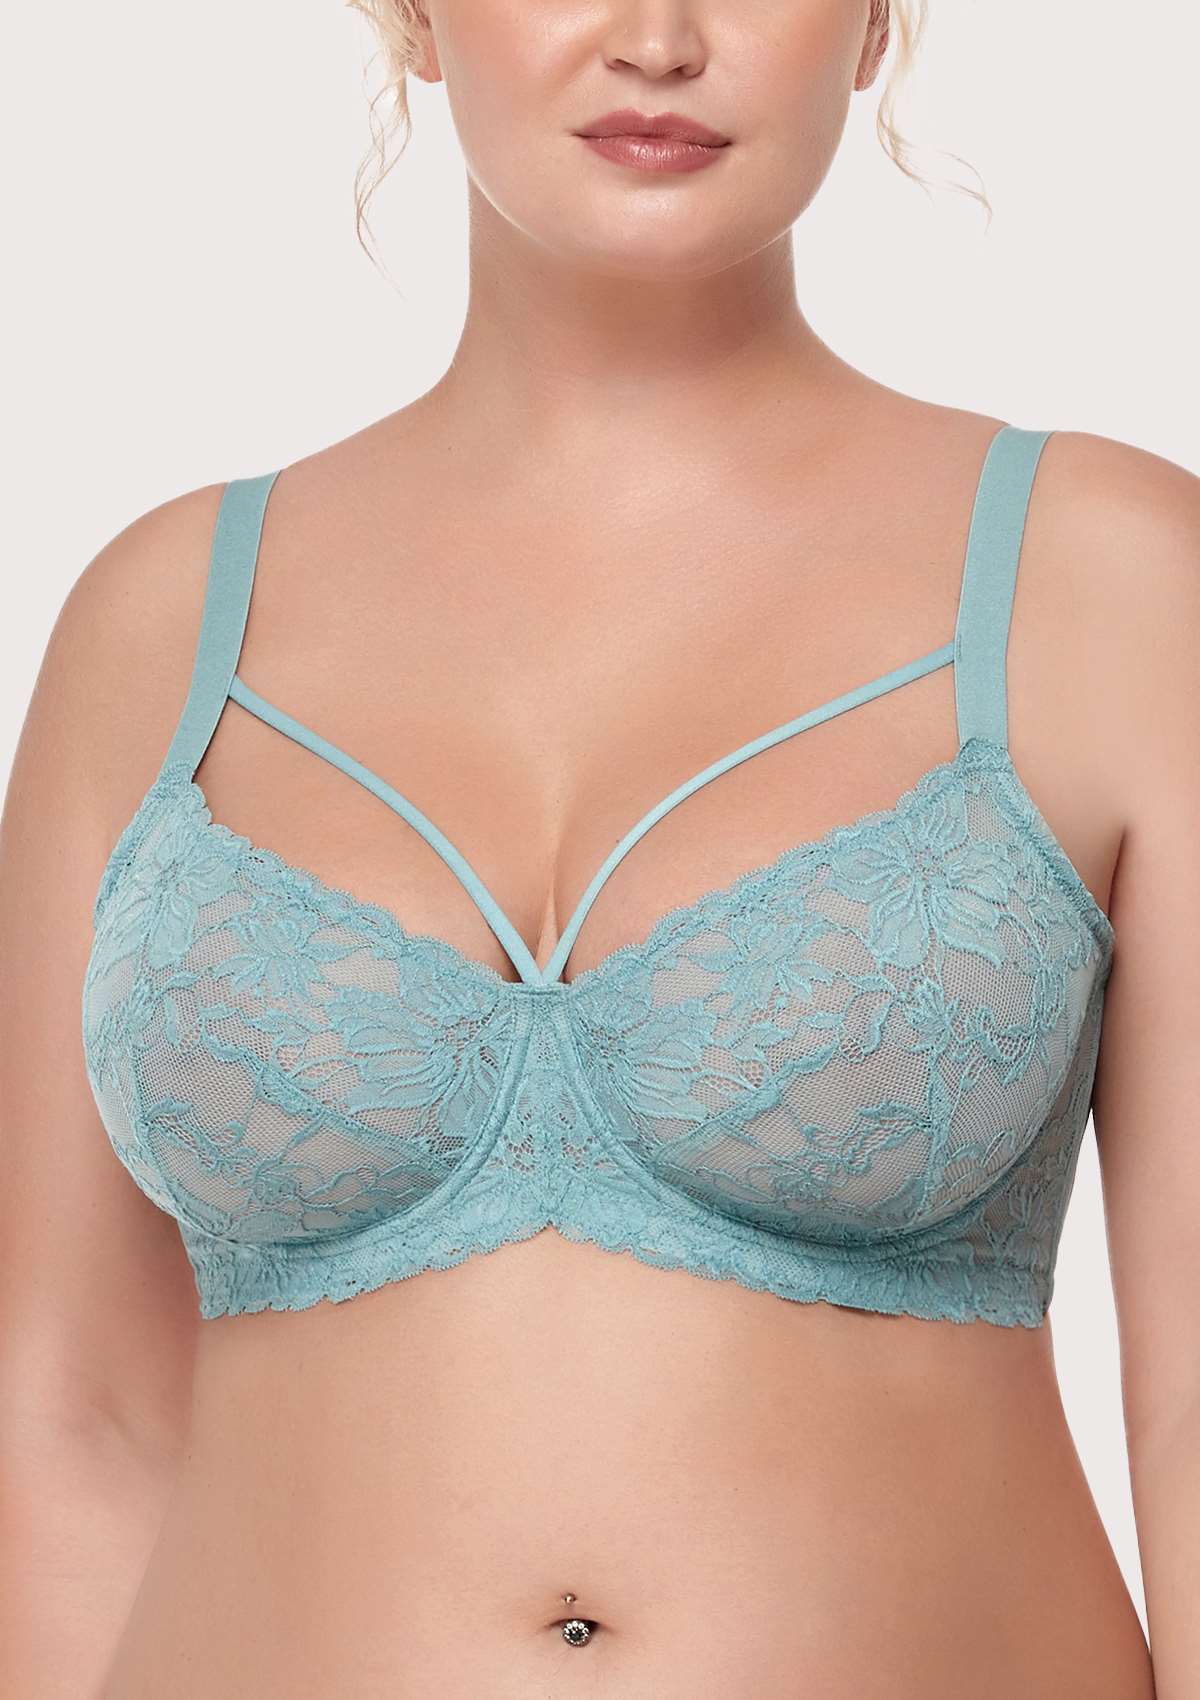 HSIA Pretty In Petals Unlined Lace Bra: Comfortable And Supportive Bra - Pewter Blue / 38 / D